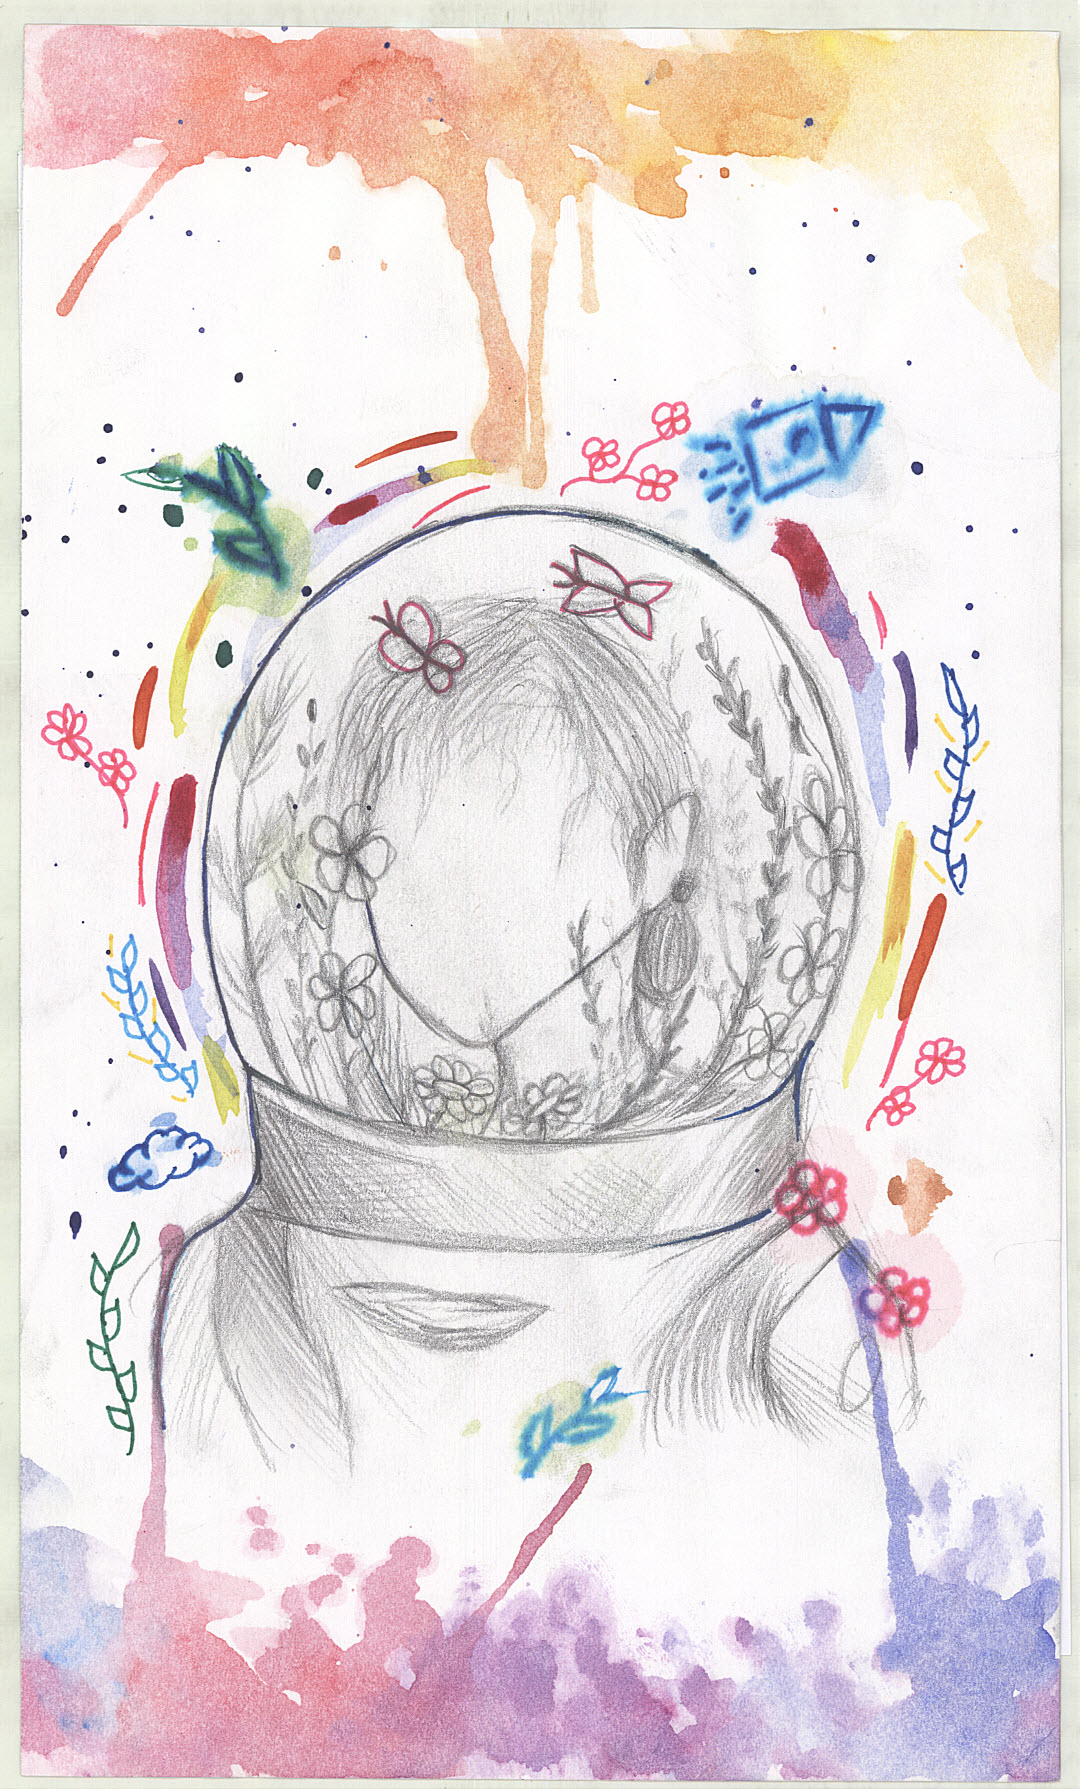 Shows the world as a crystal ball, flowers, rocket ship and a girl